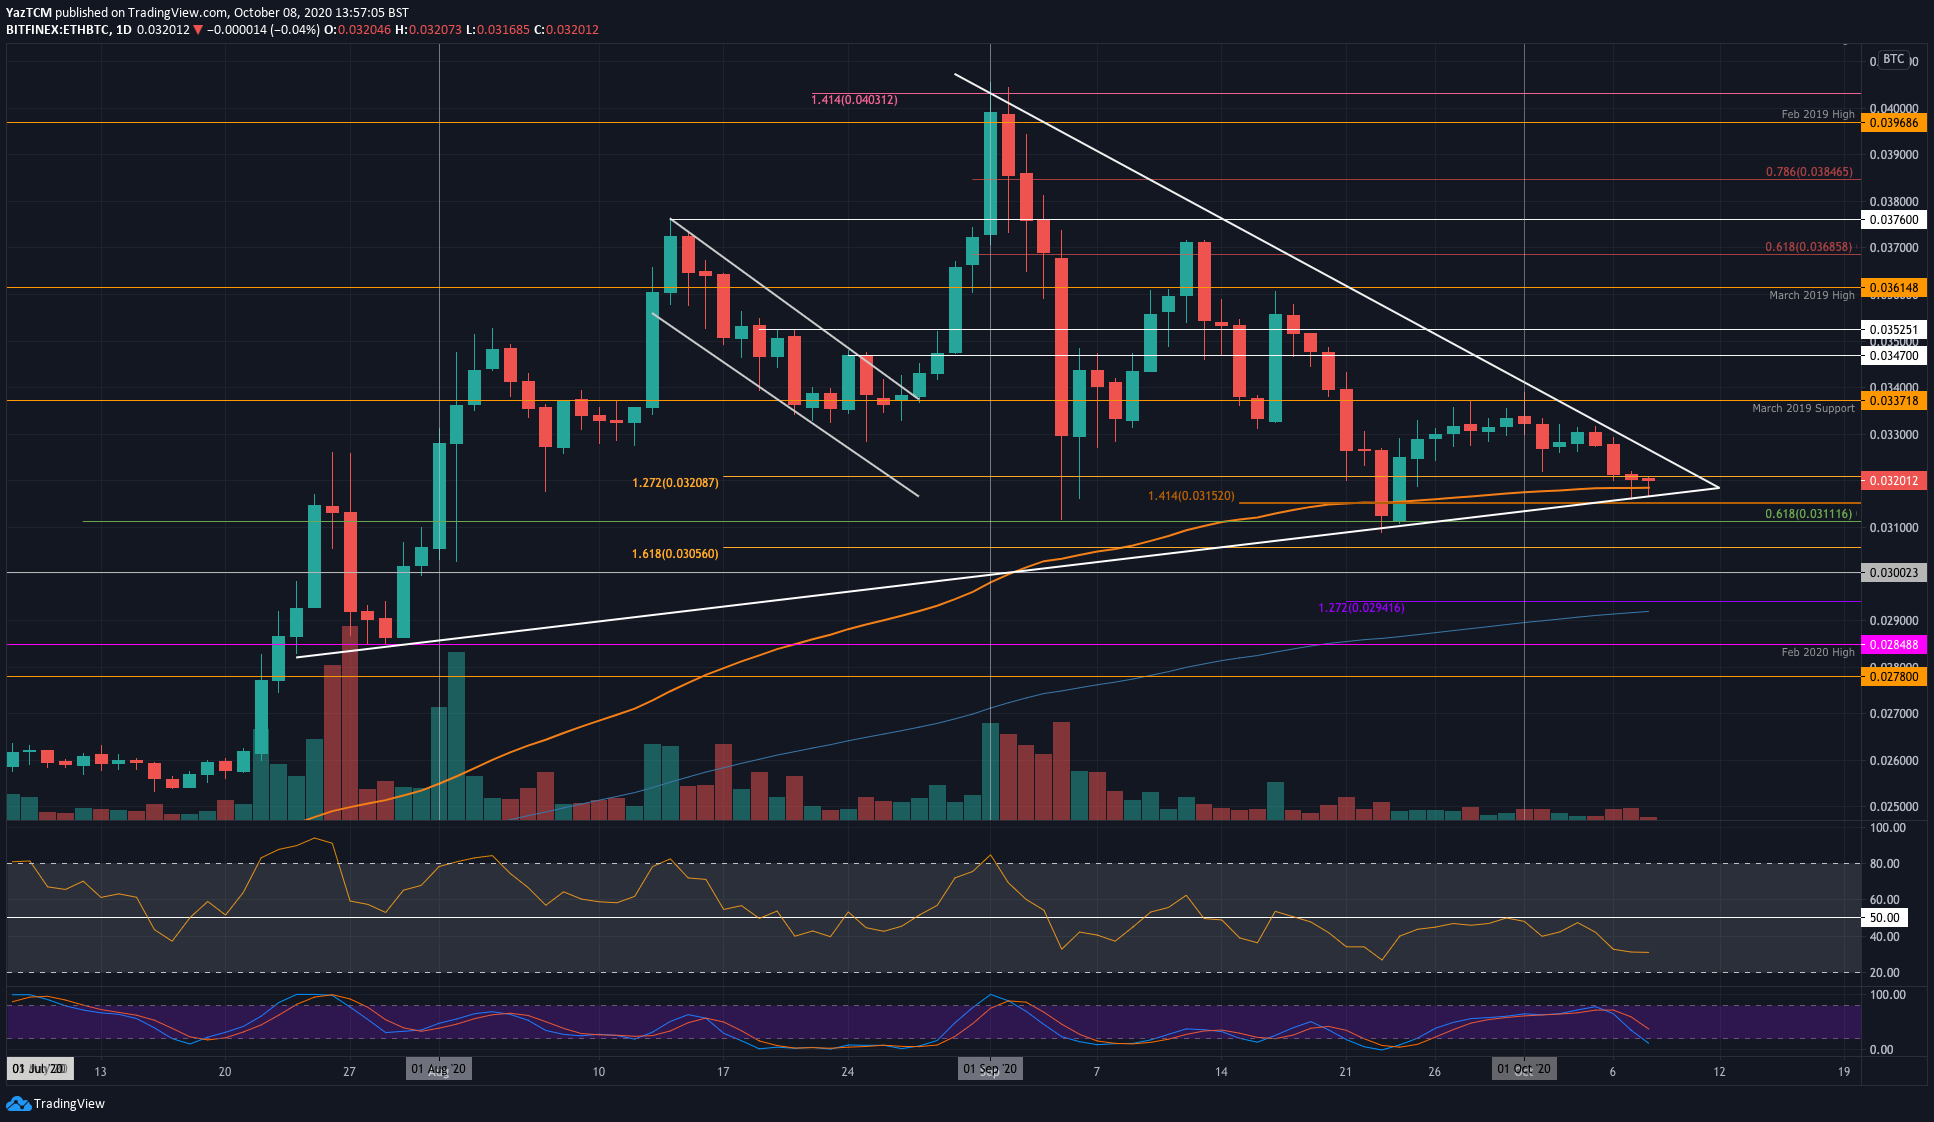 Ethereum Bulls Attempting a Shot at $350, Breakout Incoming? (ETH Price Analysis)